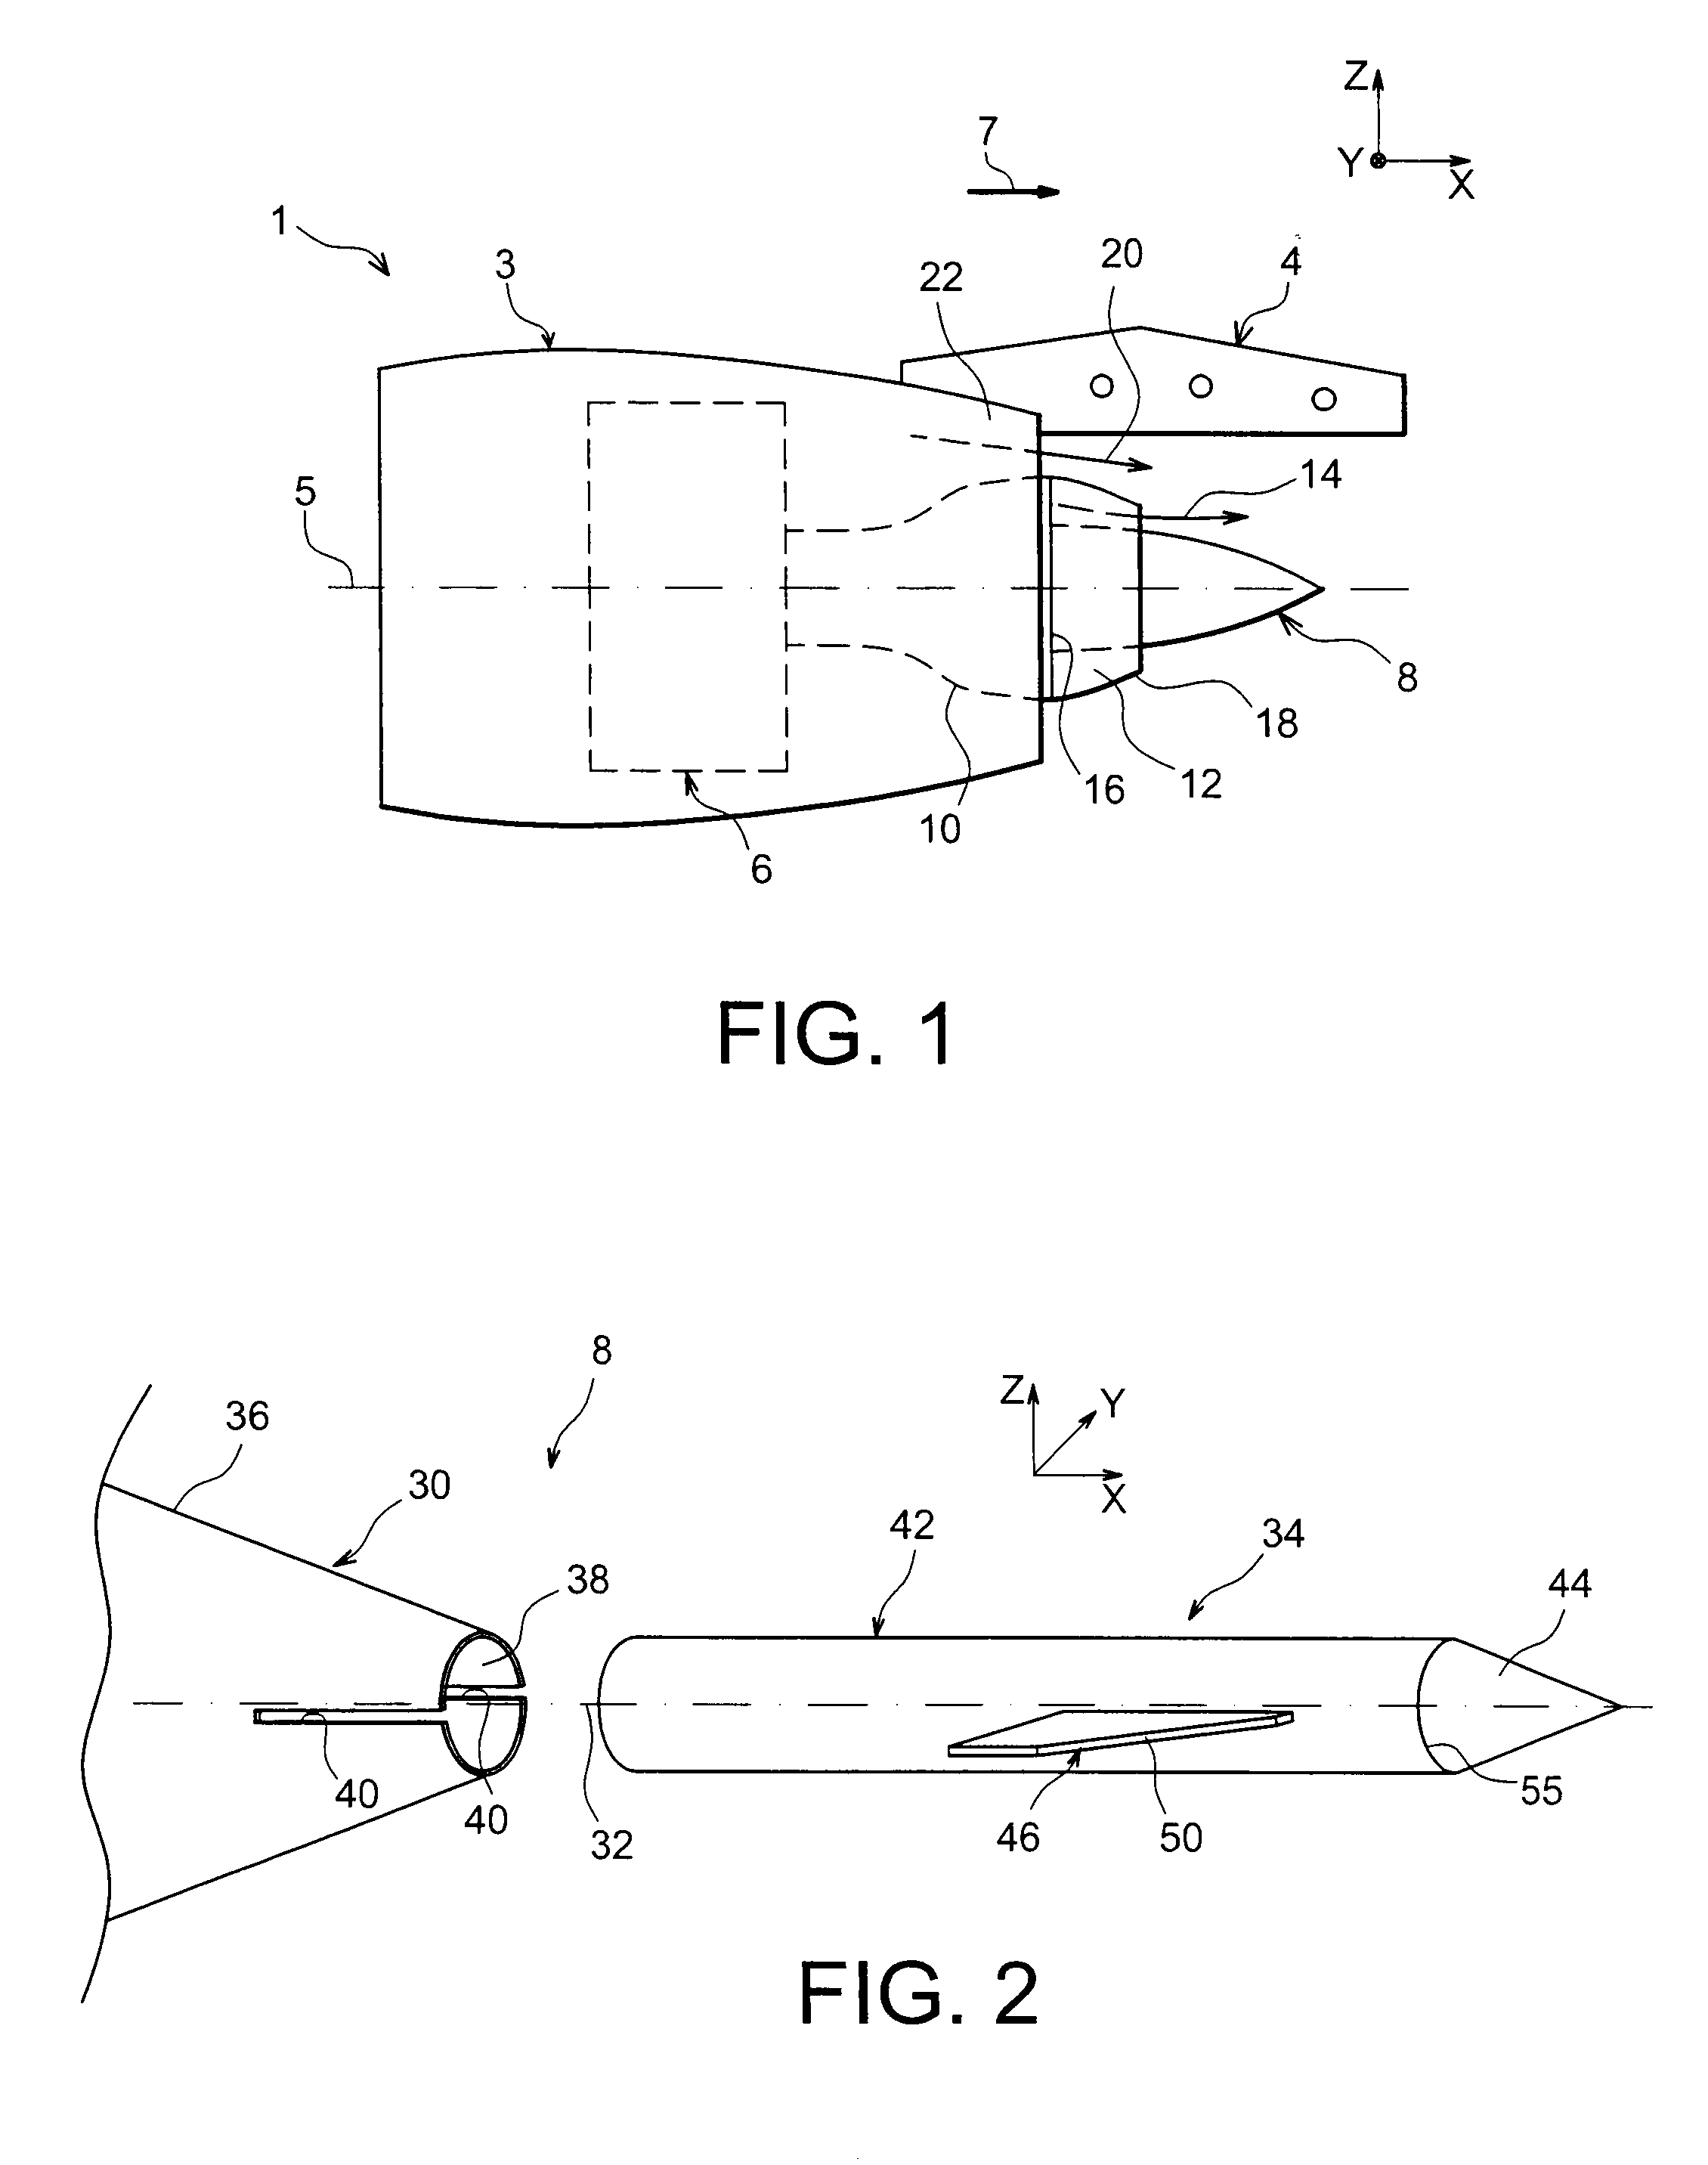 Gas ejection cone for an aircraft turbojet equipped with a device for generating turbulence in a primary flow limiting jet noise